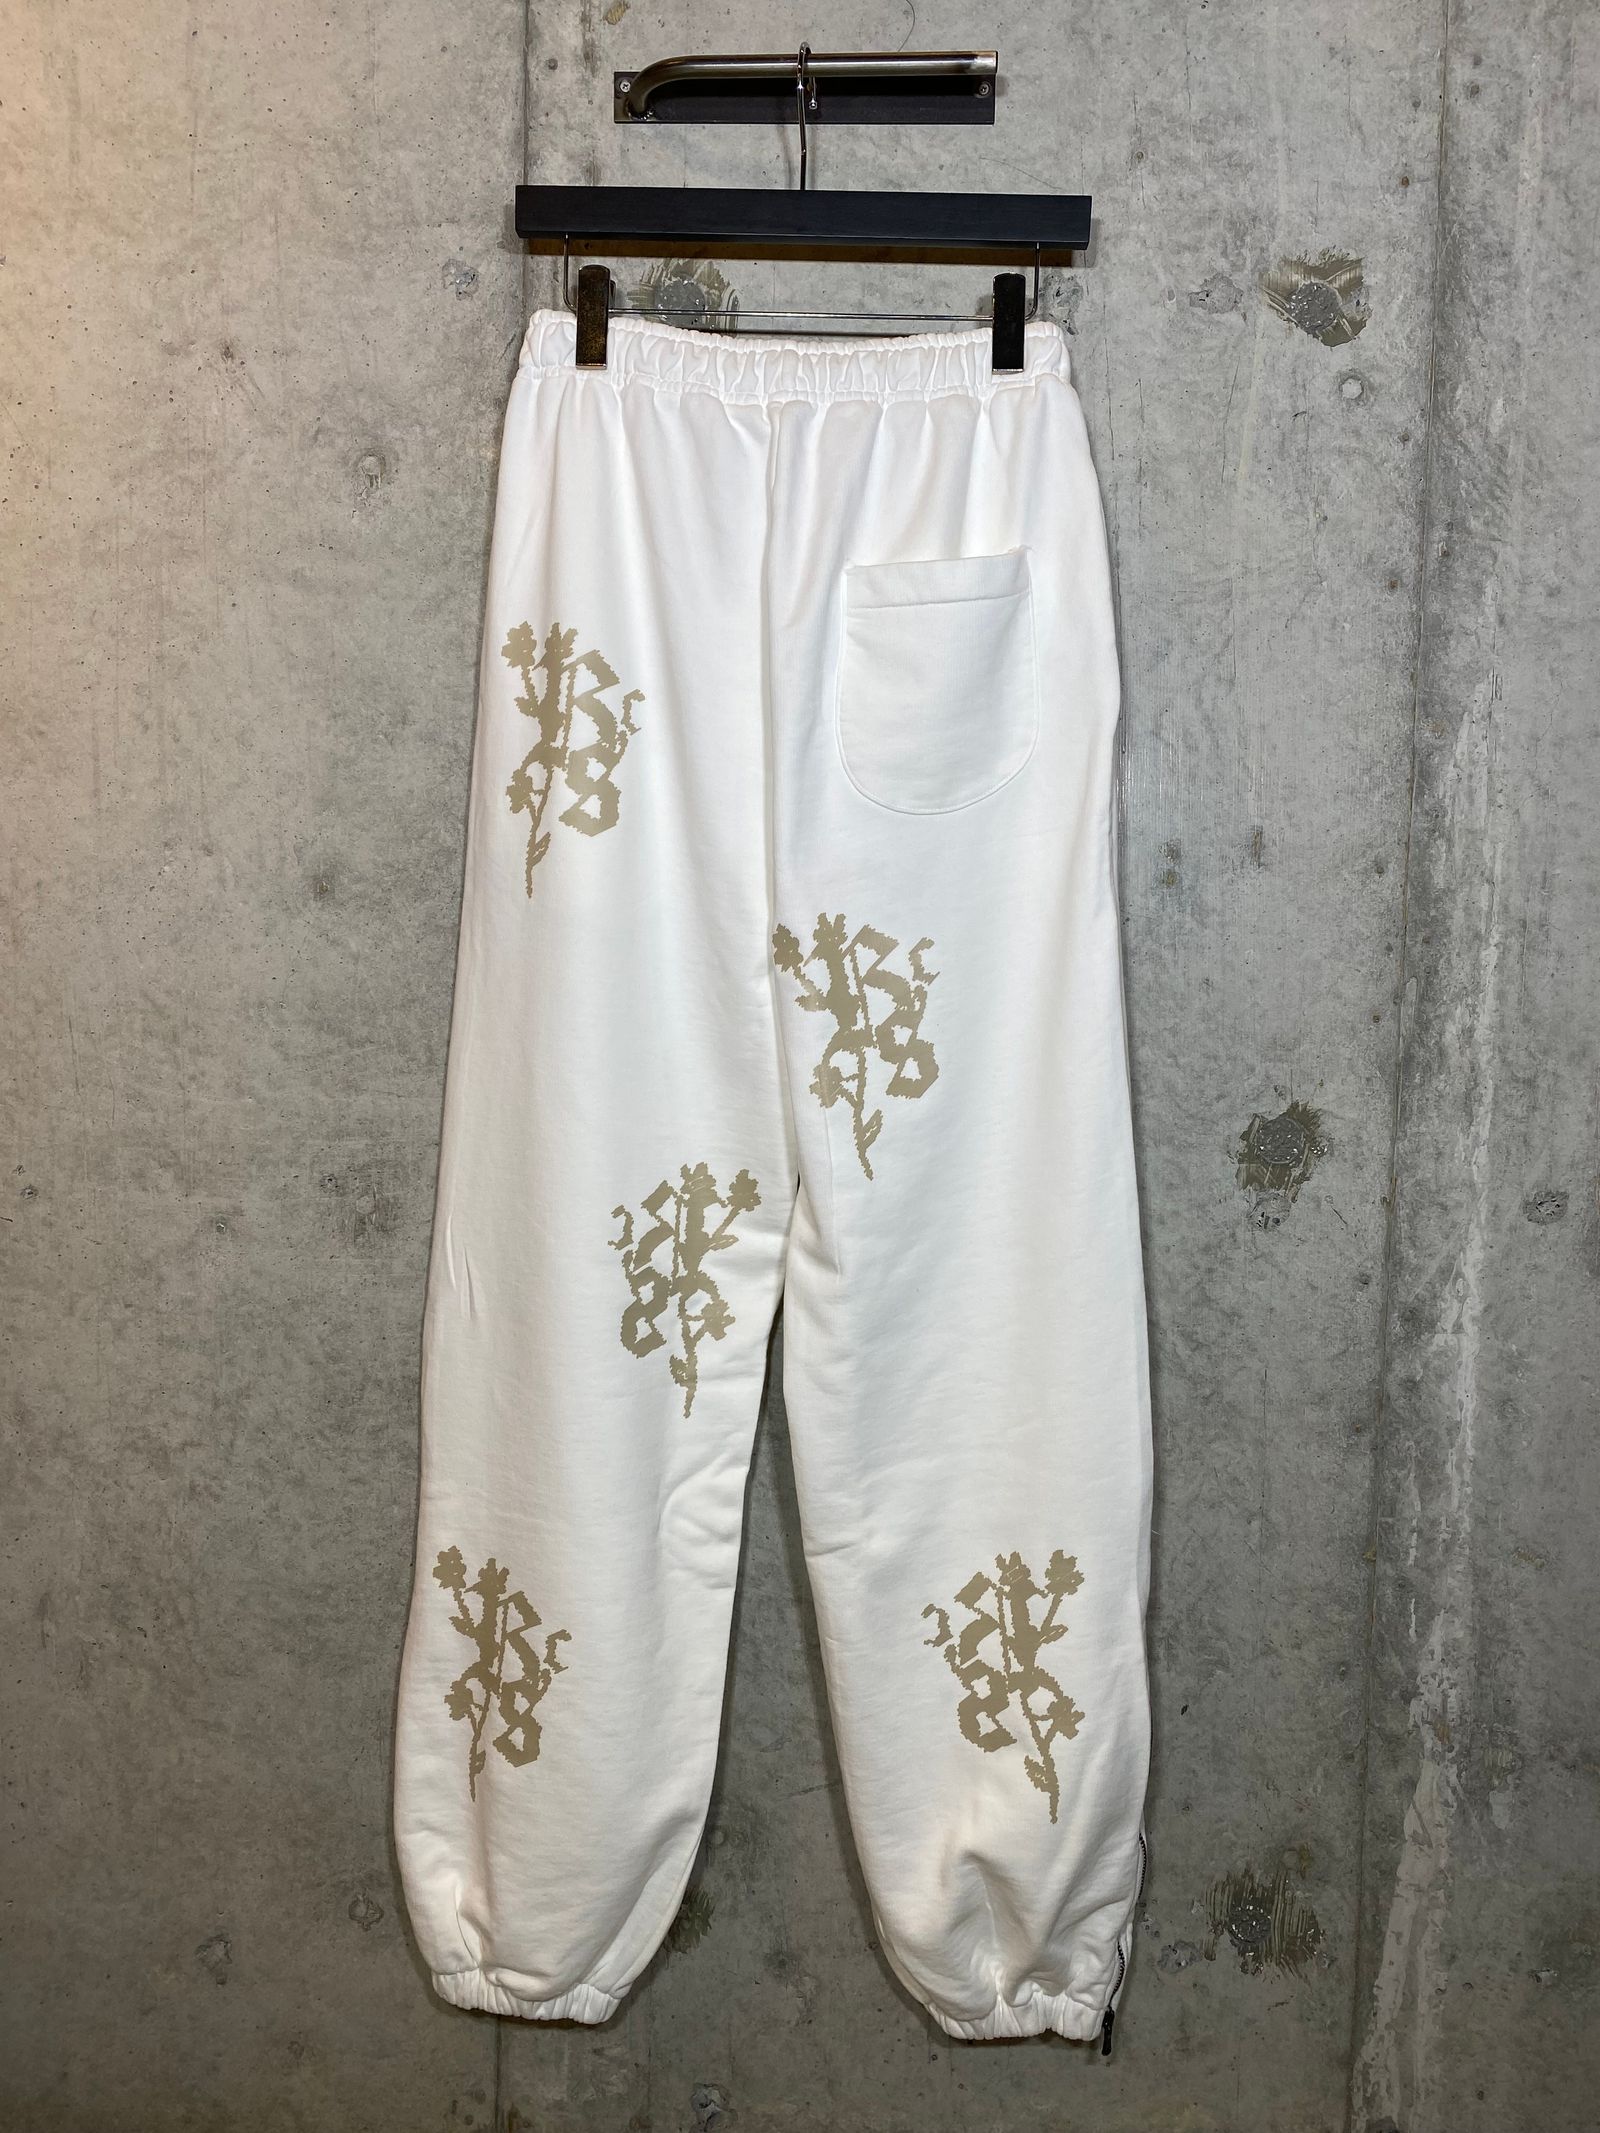 backsideclub - FLEECE ZIPPED PANTS/FLOWER BLACK | R and another 